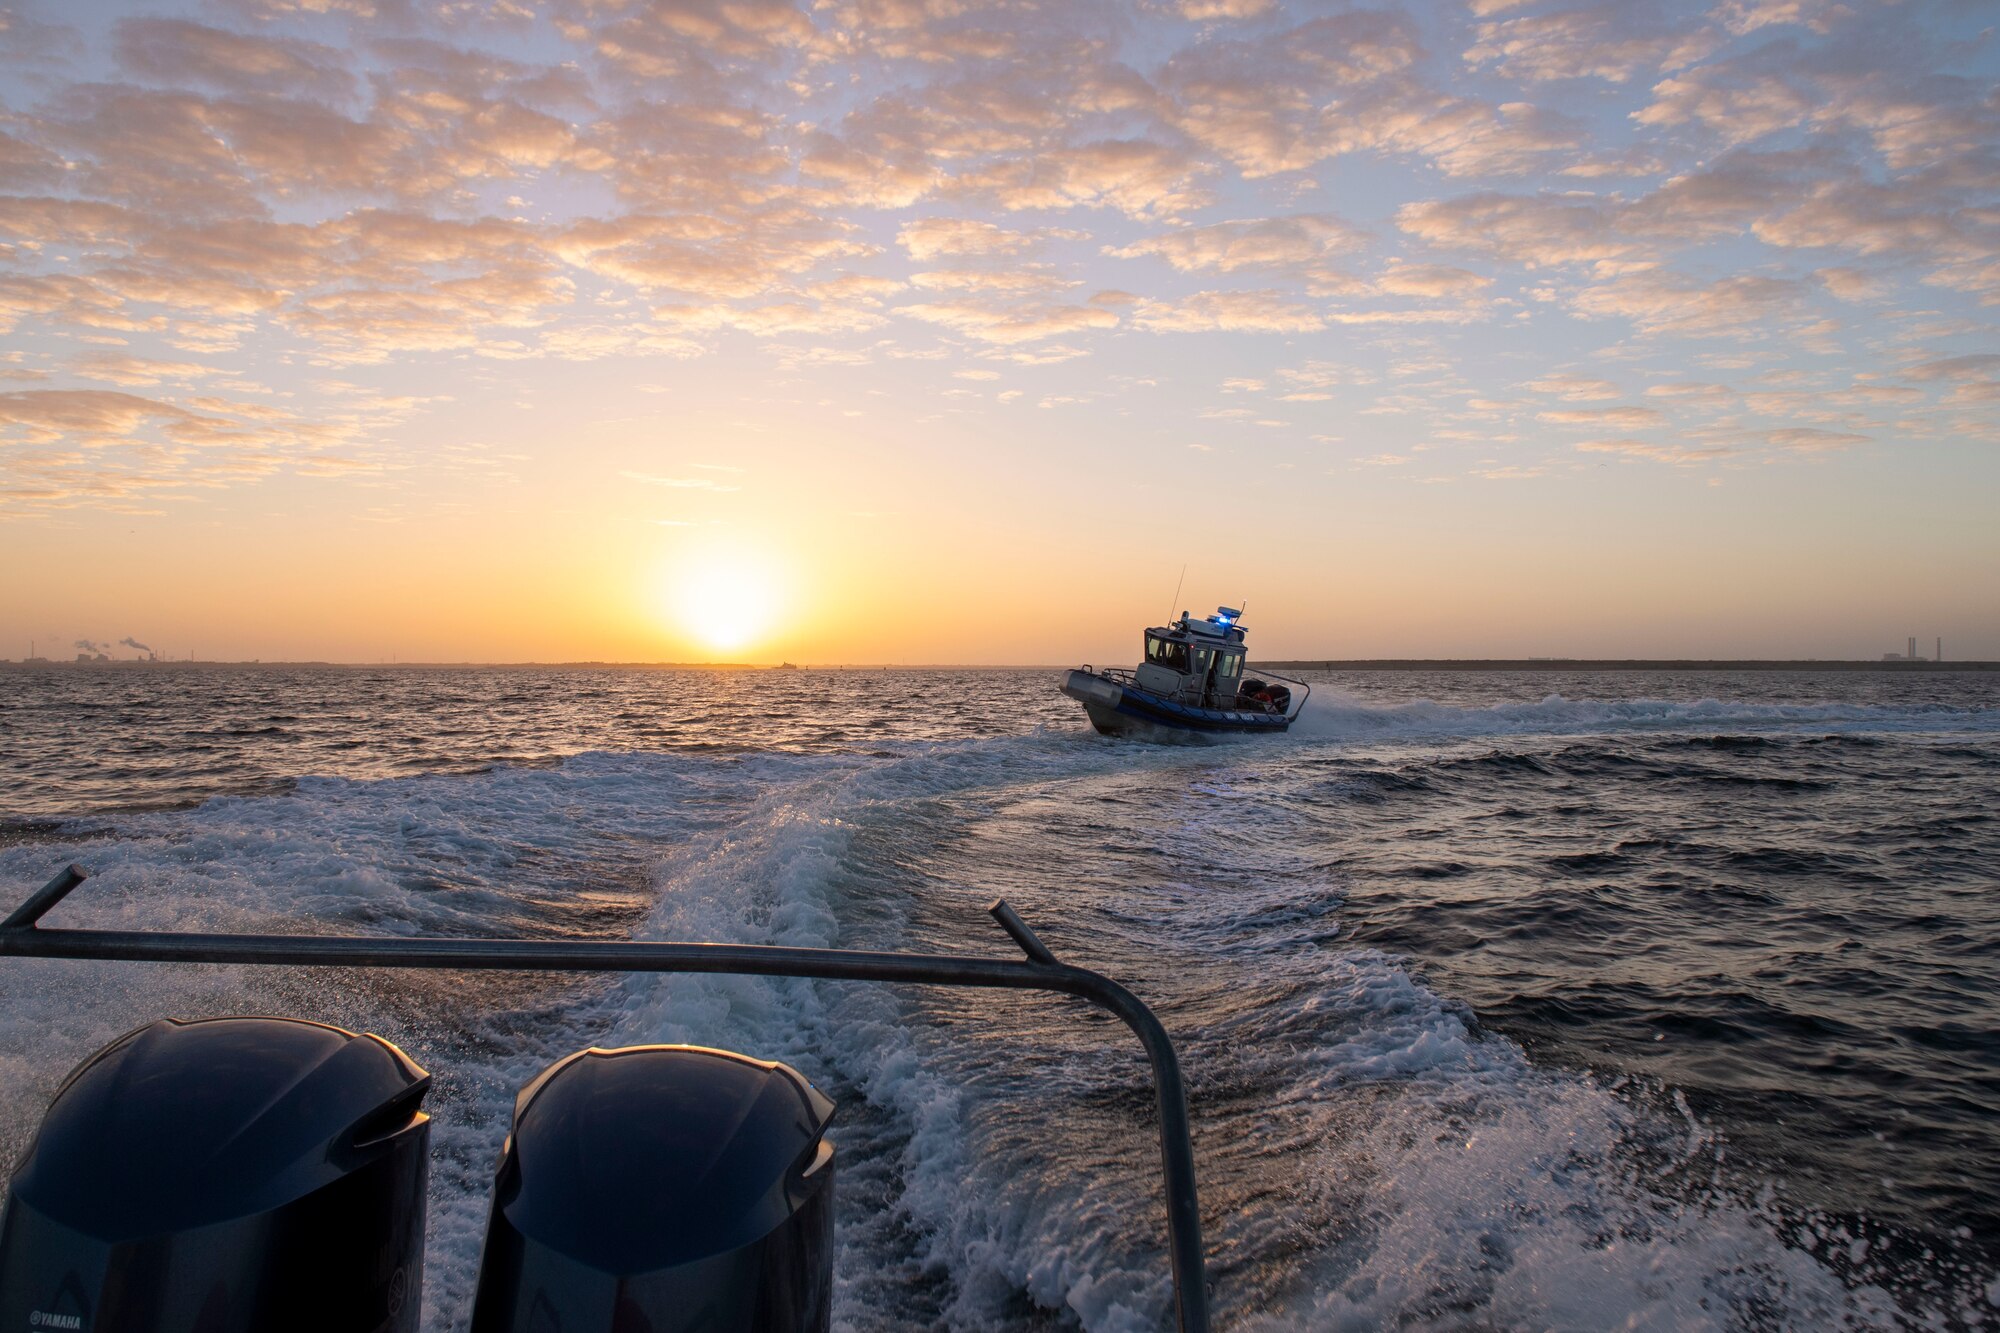 Two patrol boats assigned to the 6th Security Forces Squadron marine patrol unit simulate detaining an unauthorized vessel in Tampa Bay, Florida, March 7, 2022.